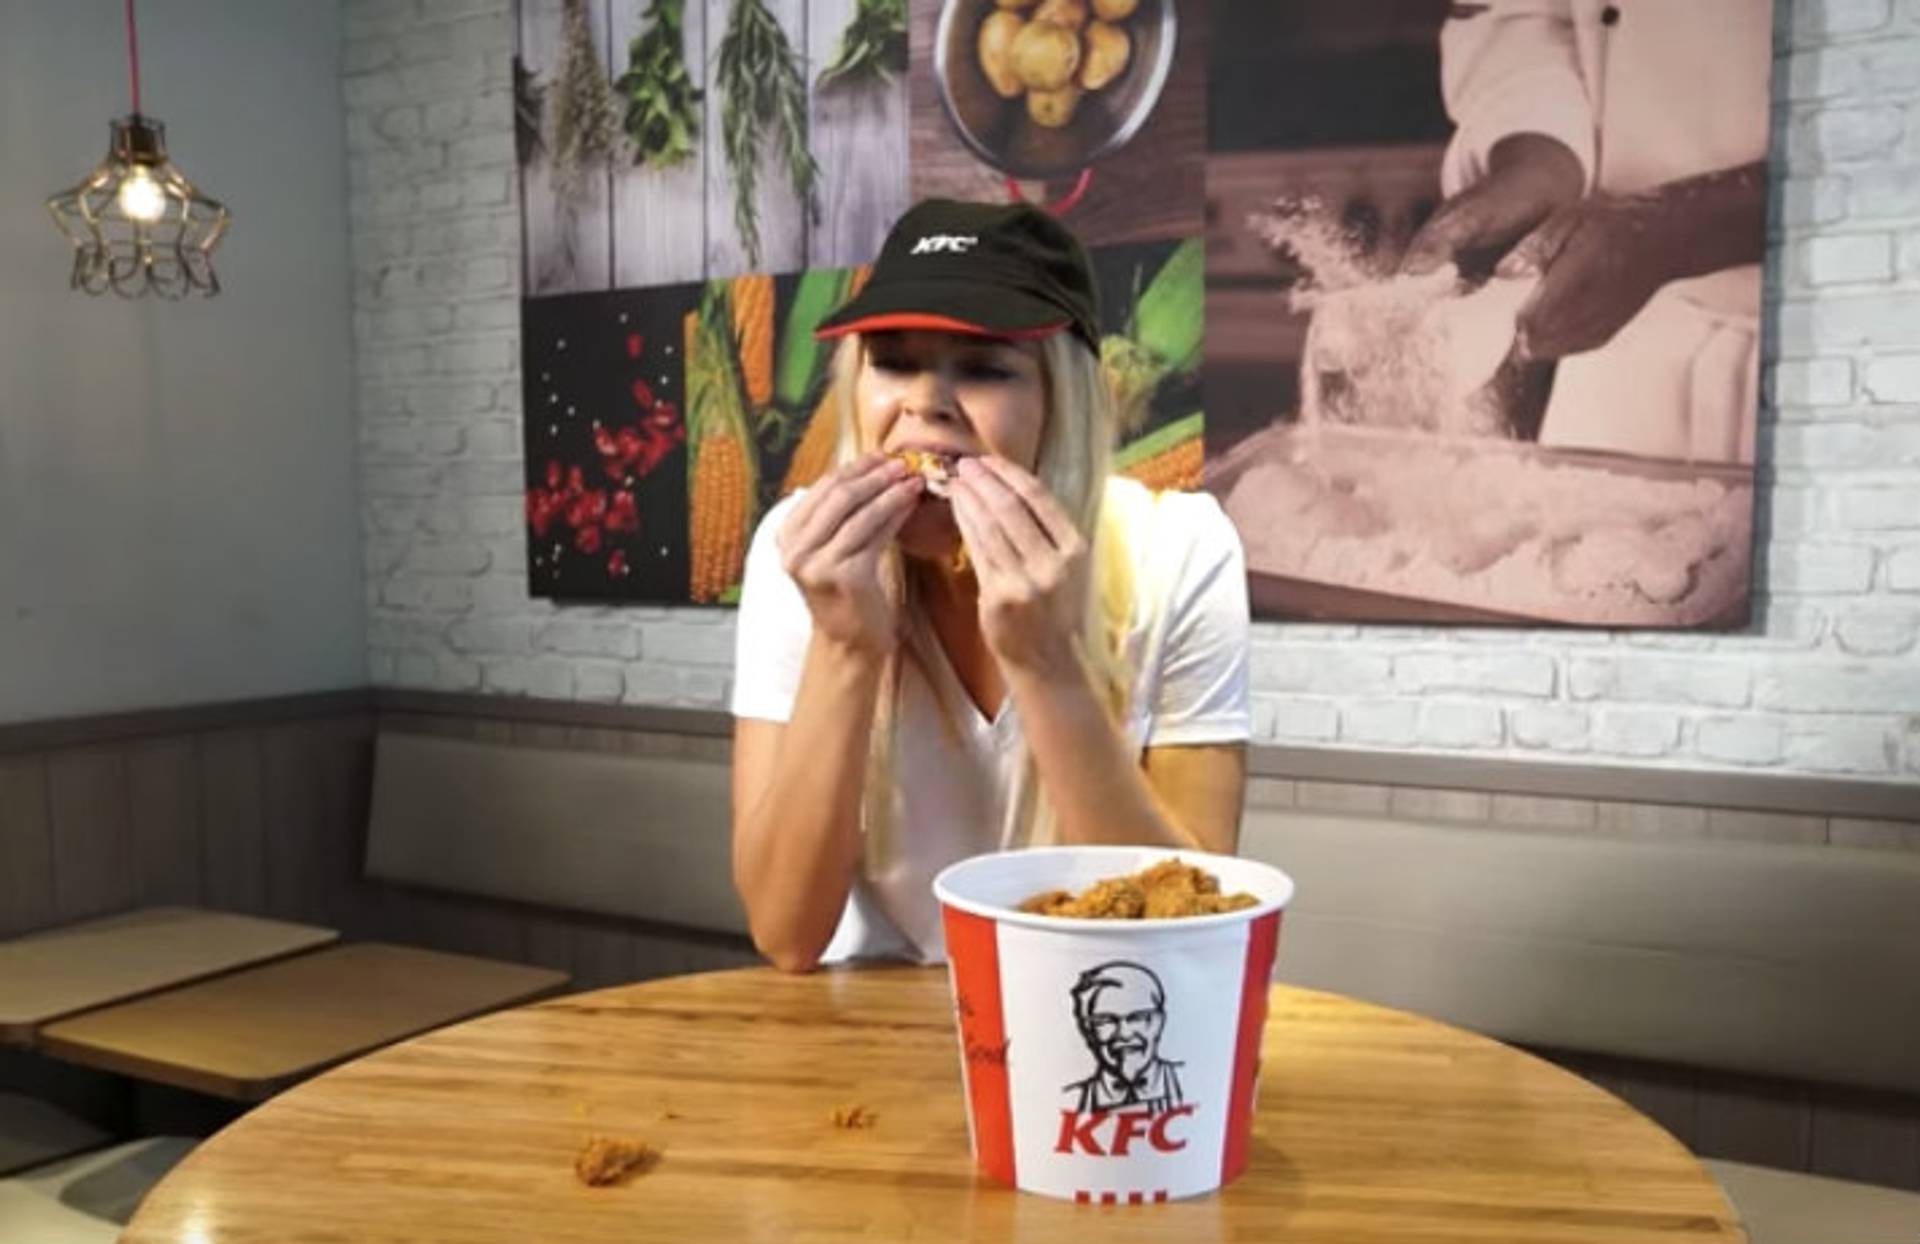 KFC courts clean eaters with cut-calorie menu